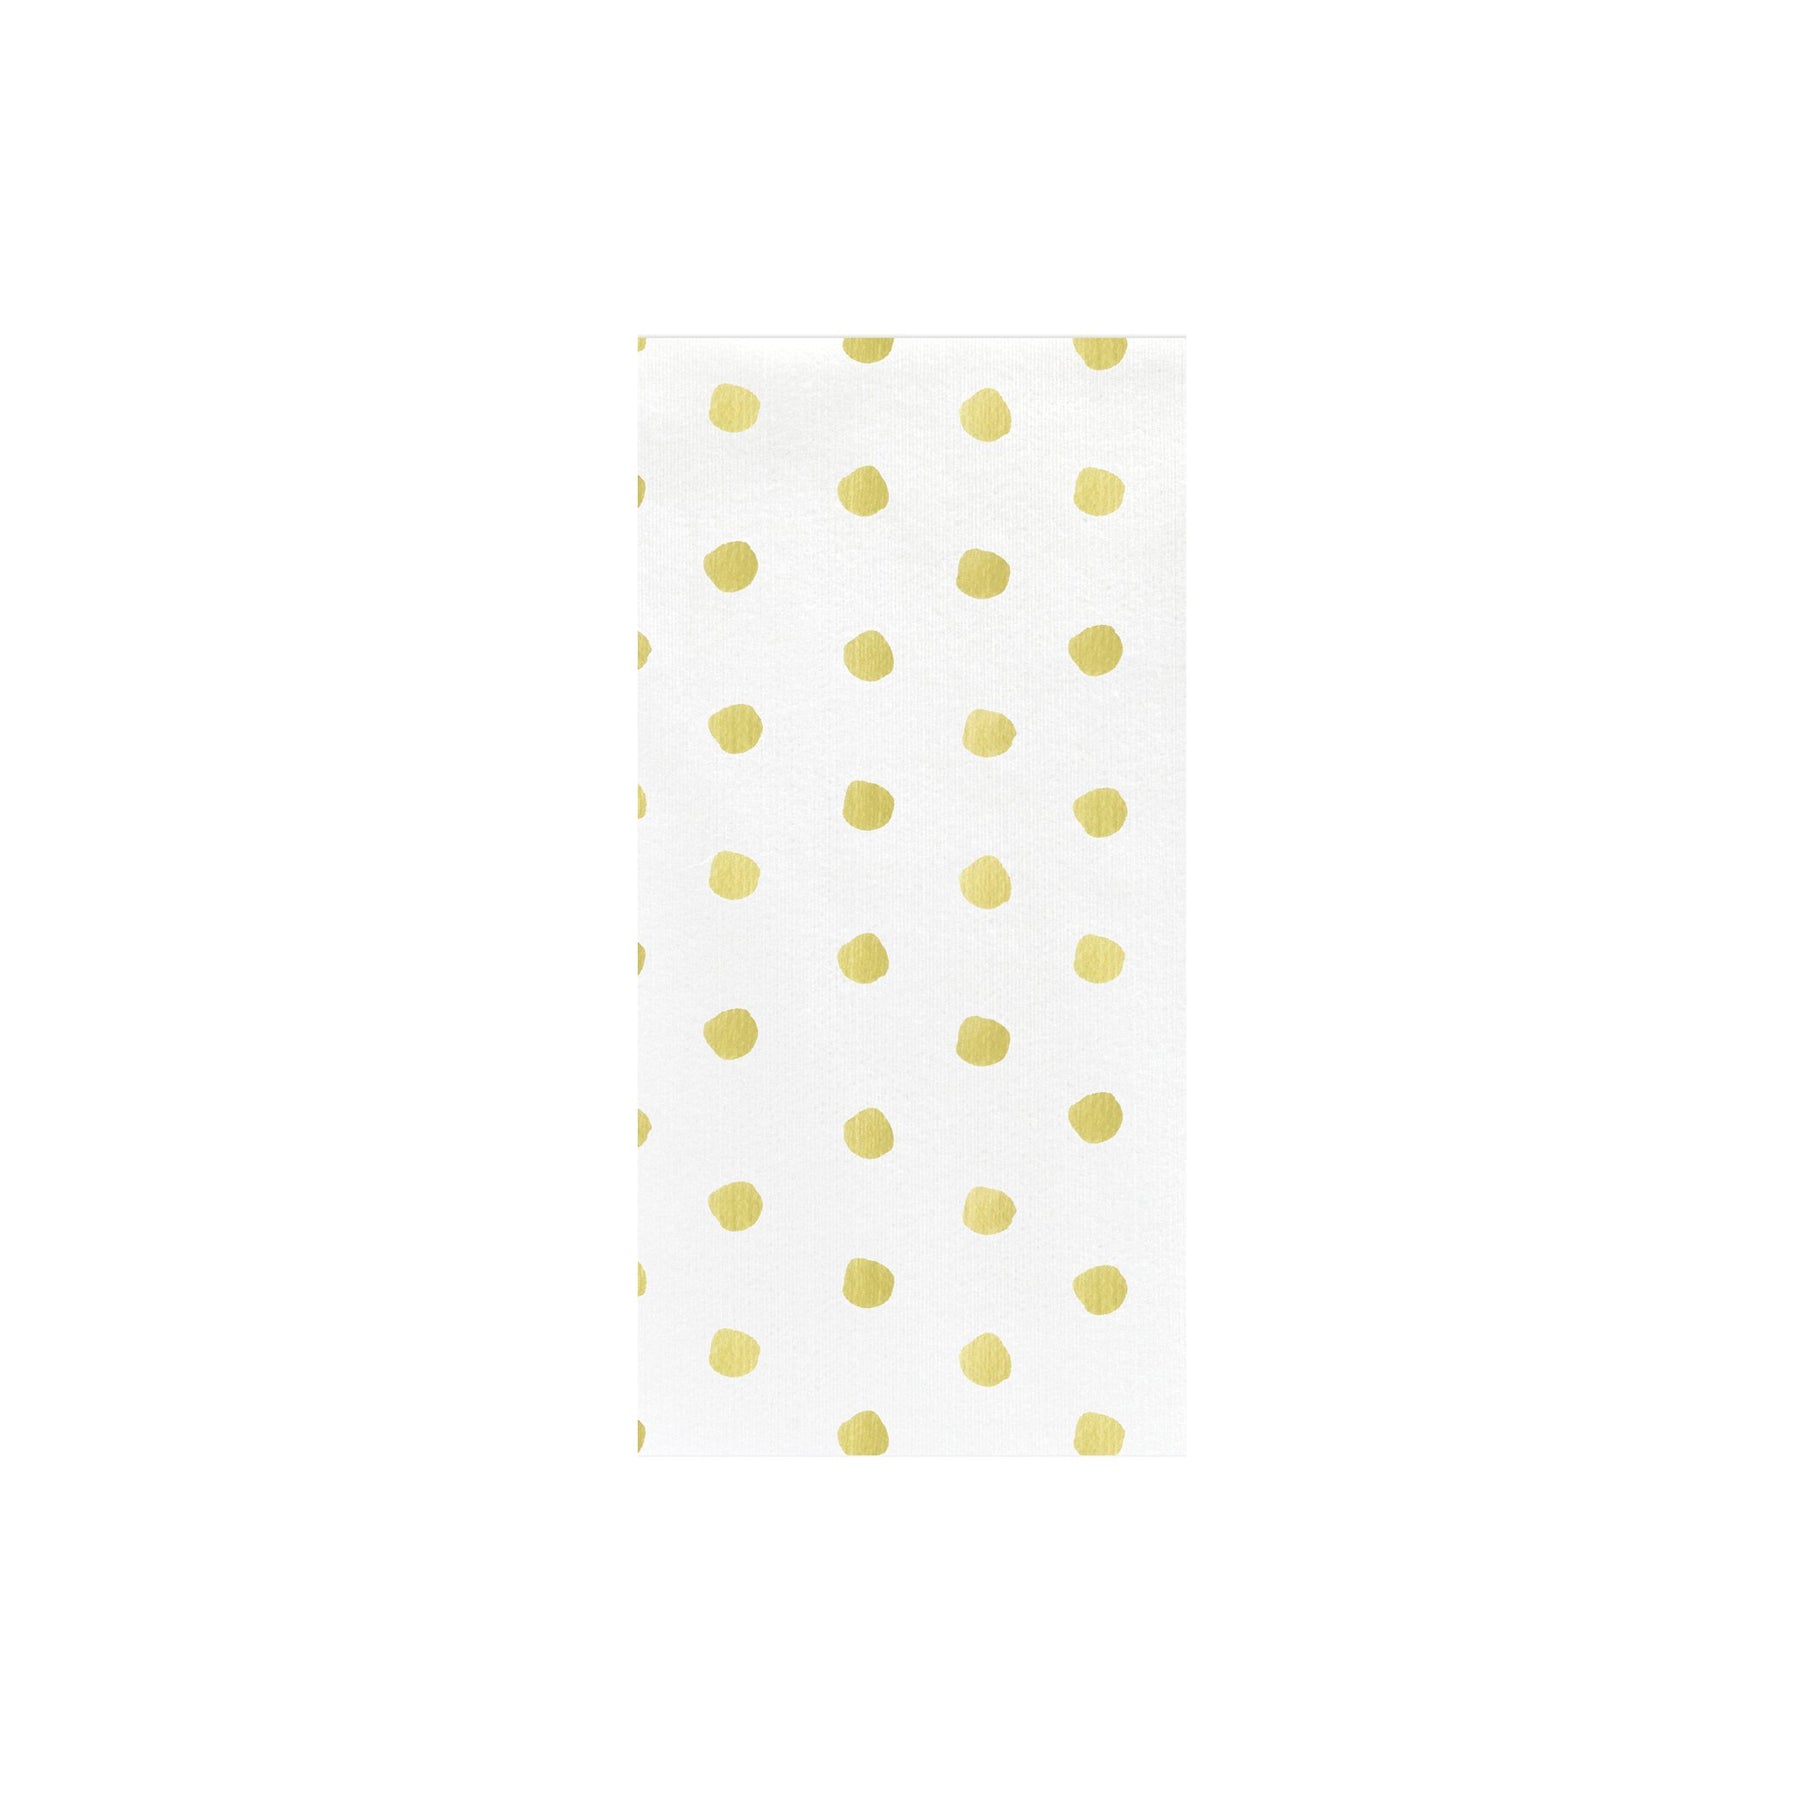 Papersoft Napkins Yellow Dot Guest Towels (Pack of 20) Kitchen + Entertaining Vietri   